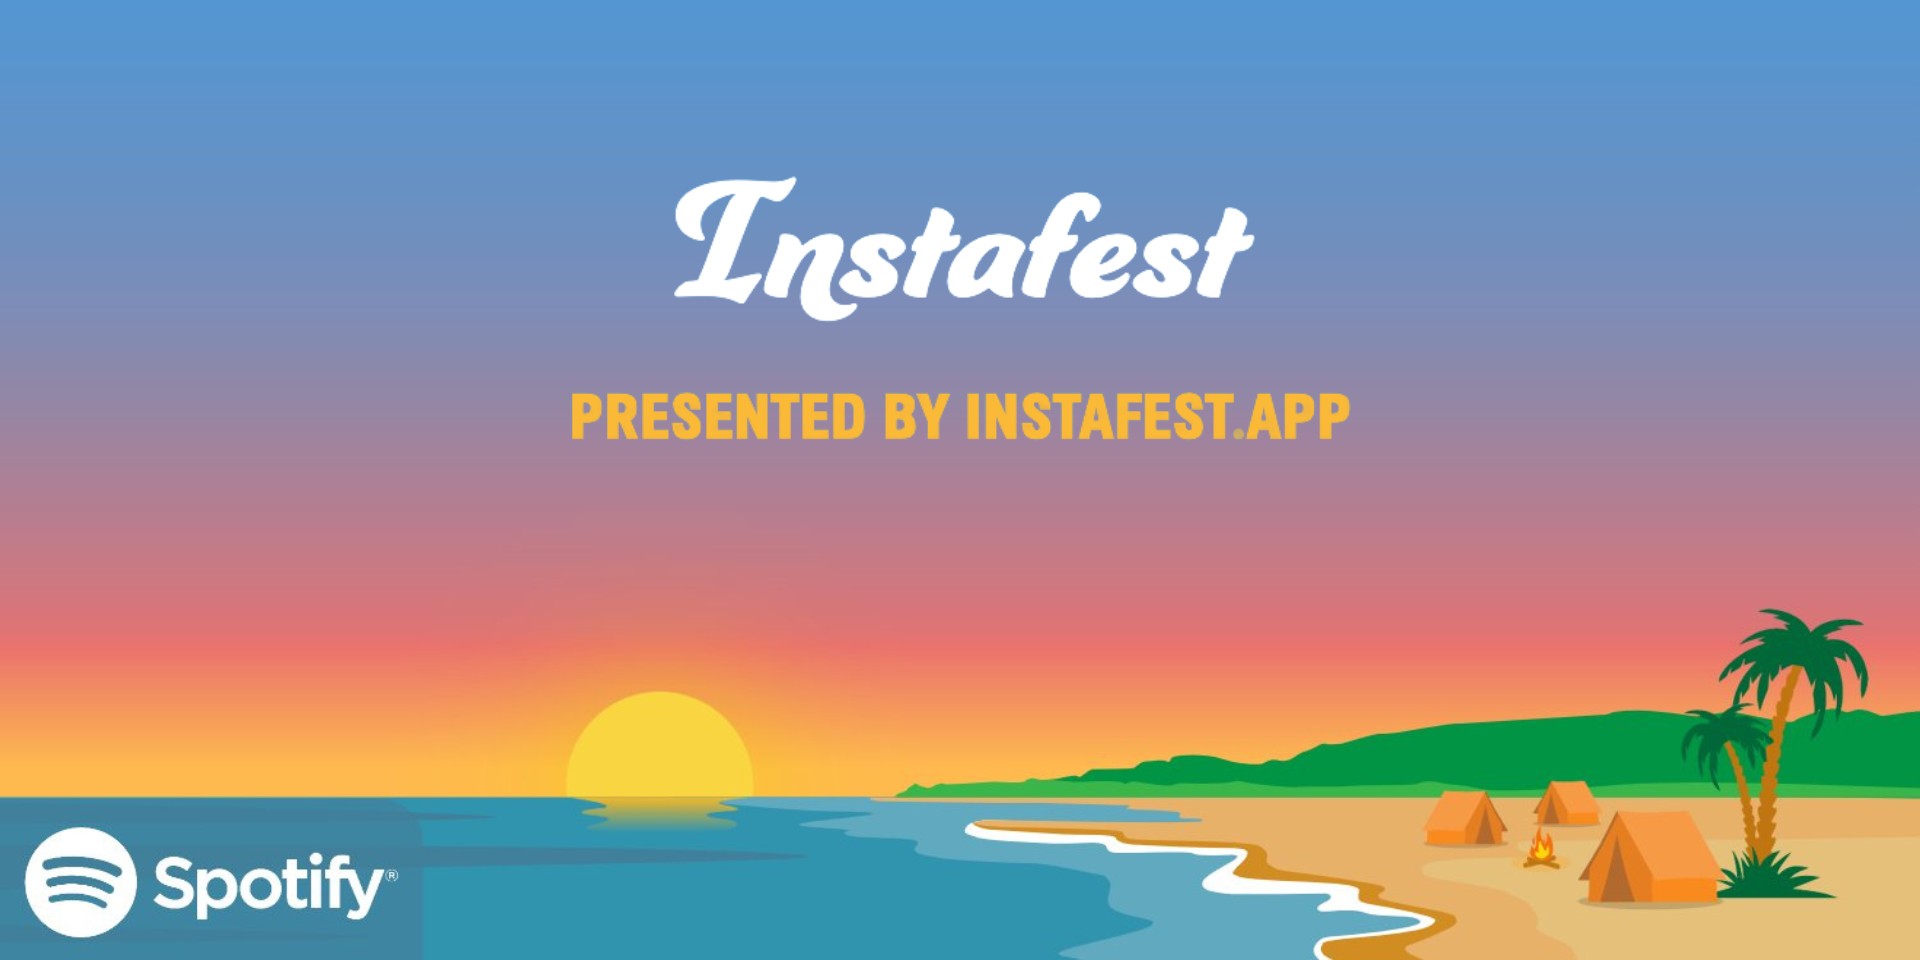 Create your dream music festival of your top Spotify artists with Instafest